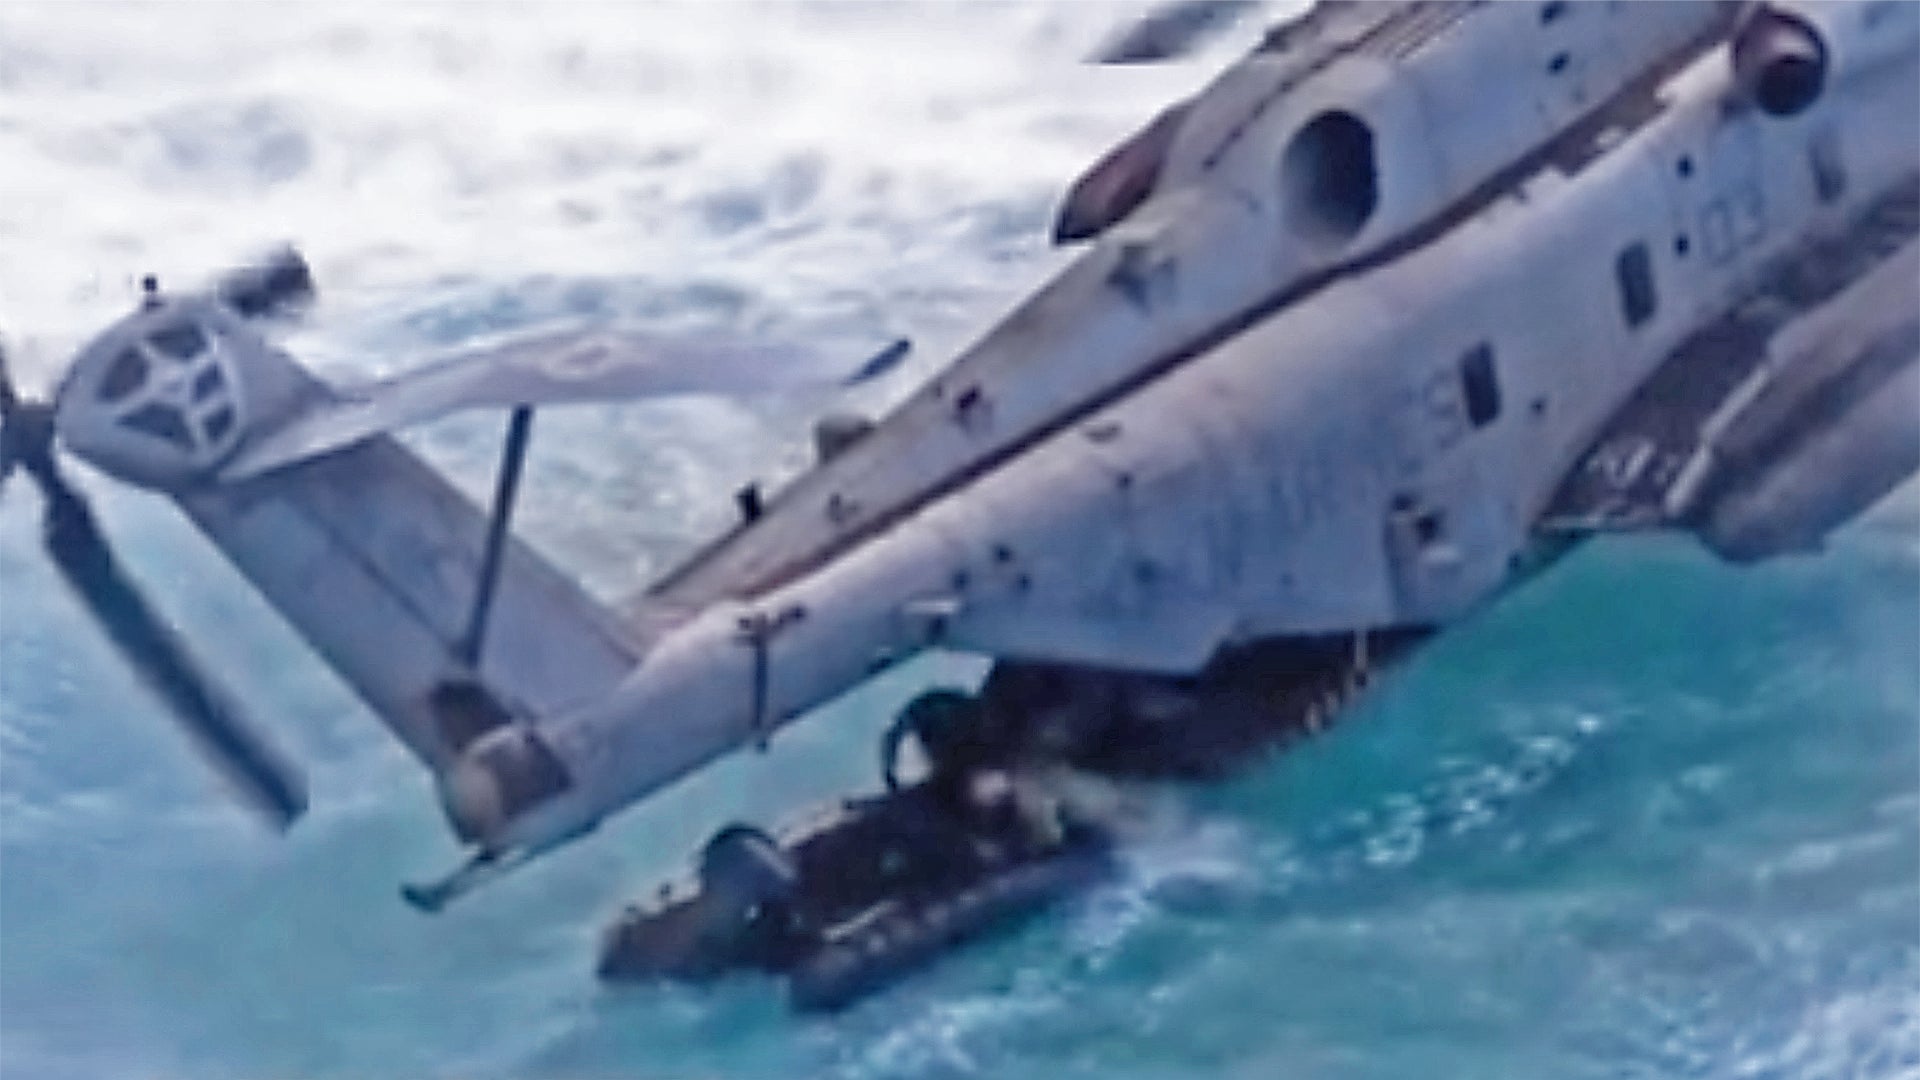 The CH-53E Super Stallion Looks Gargantuan In This Slow Motion Helocast Clip